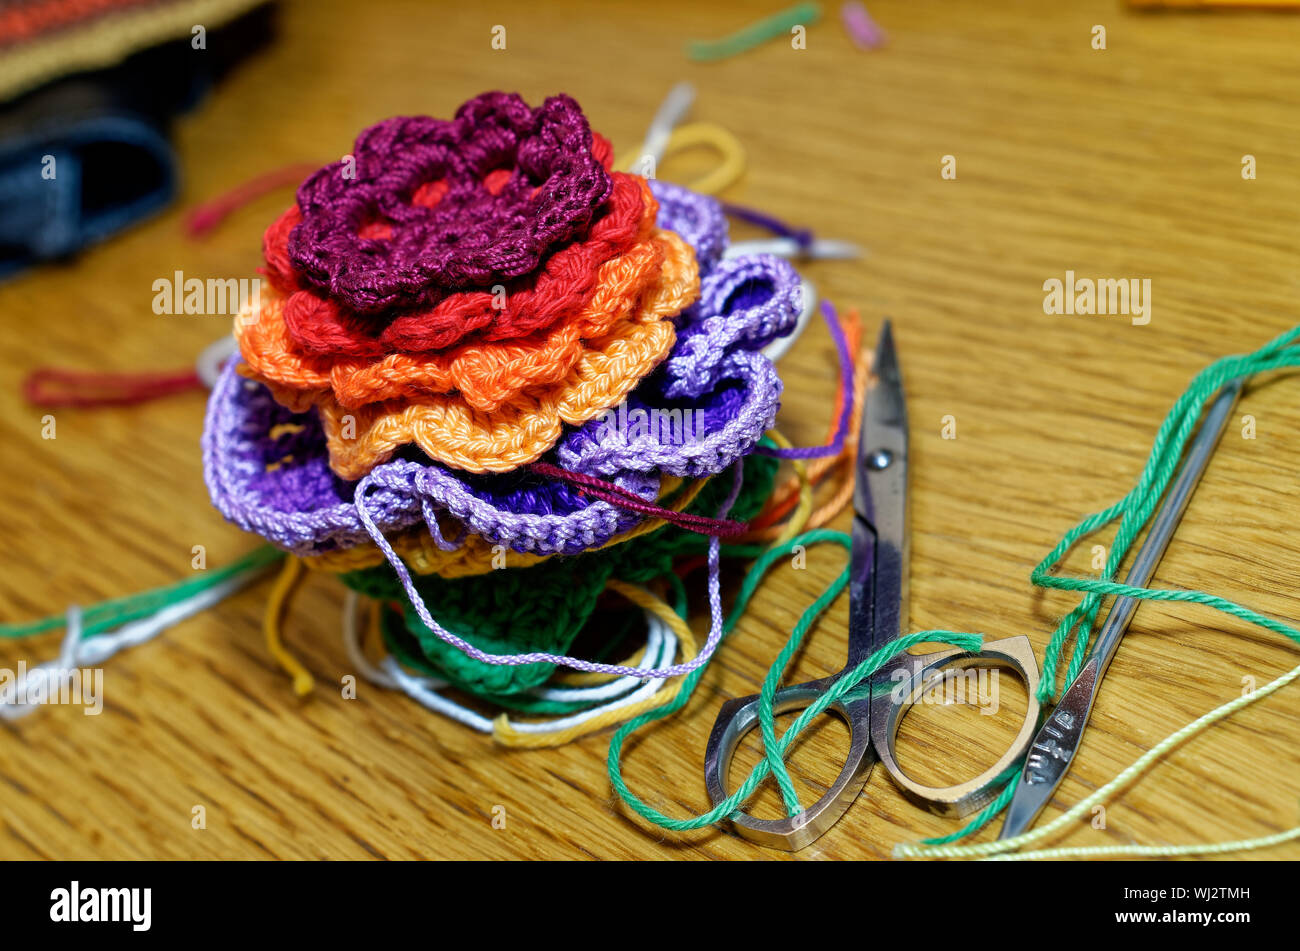 Close-up Of Colorful Knitted Art Product Stock Photo